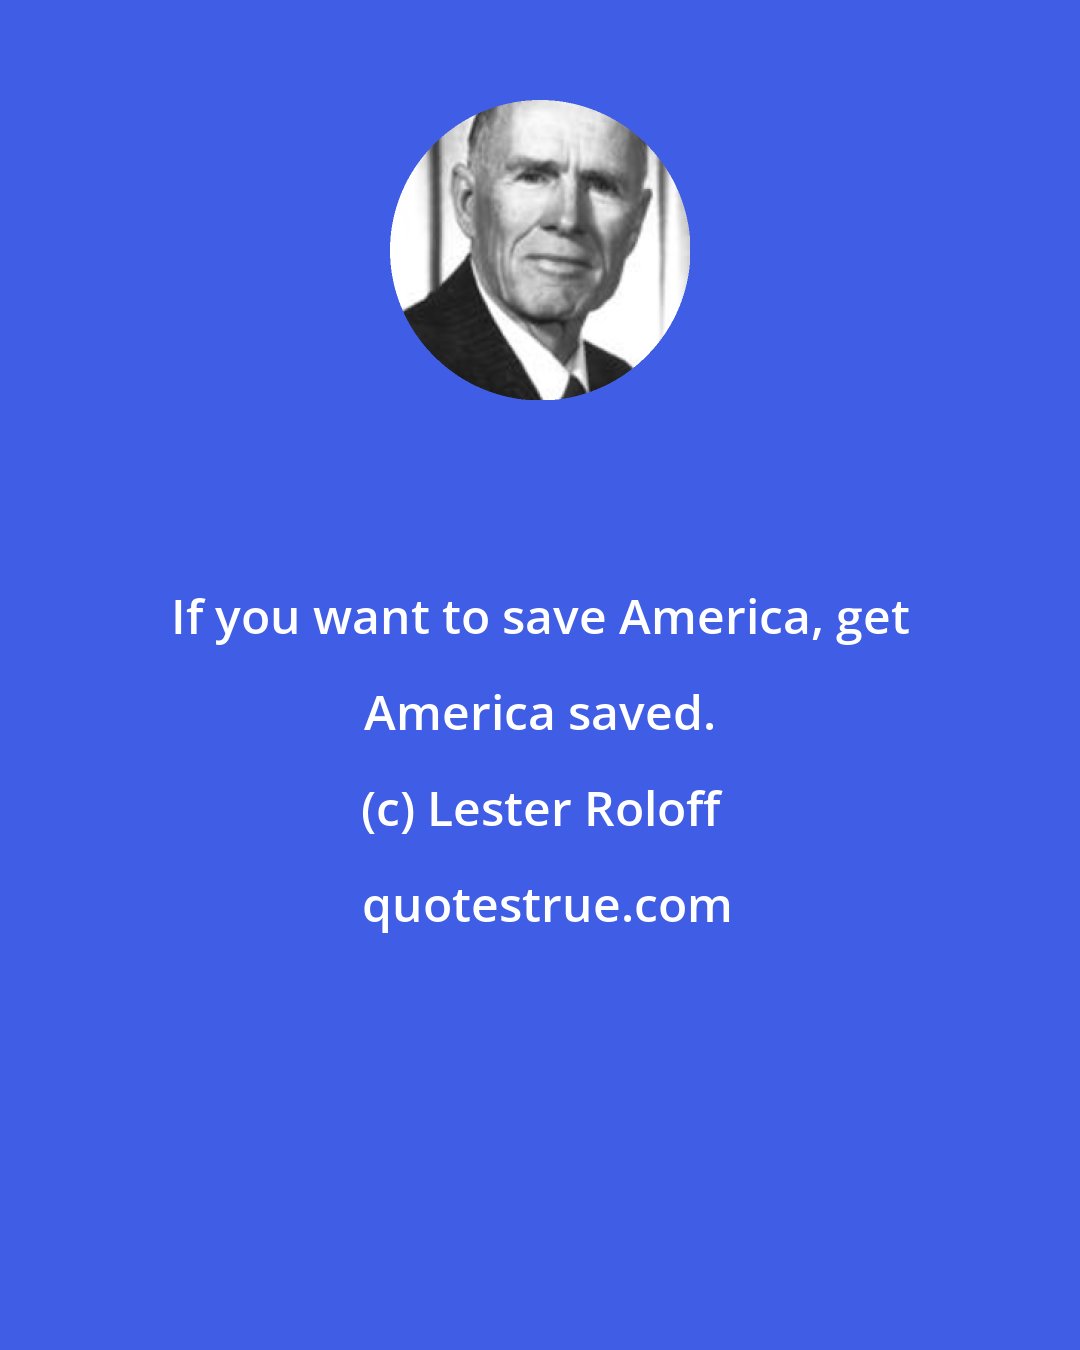 Lester Roloff: If you want to save America, get America saved.